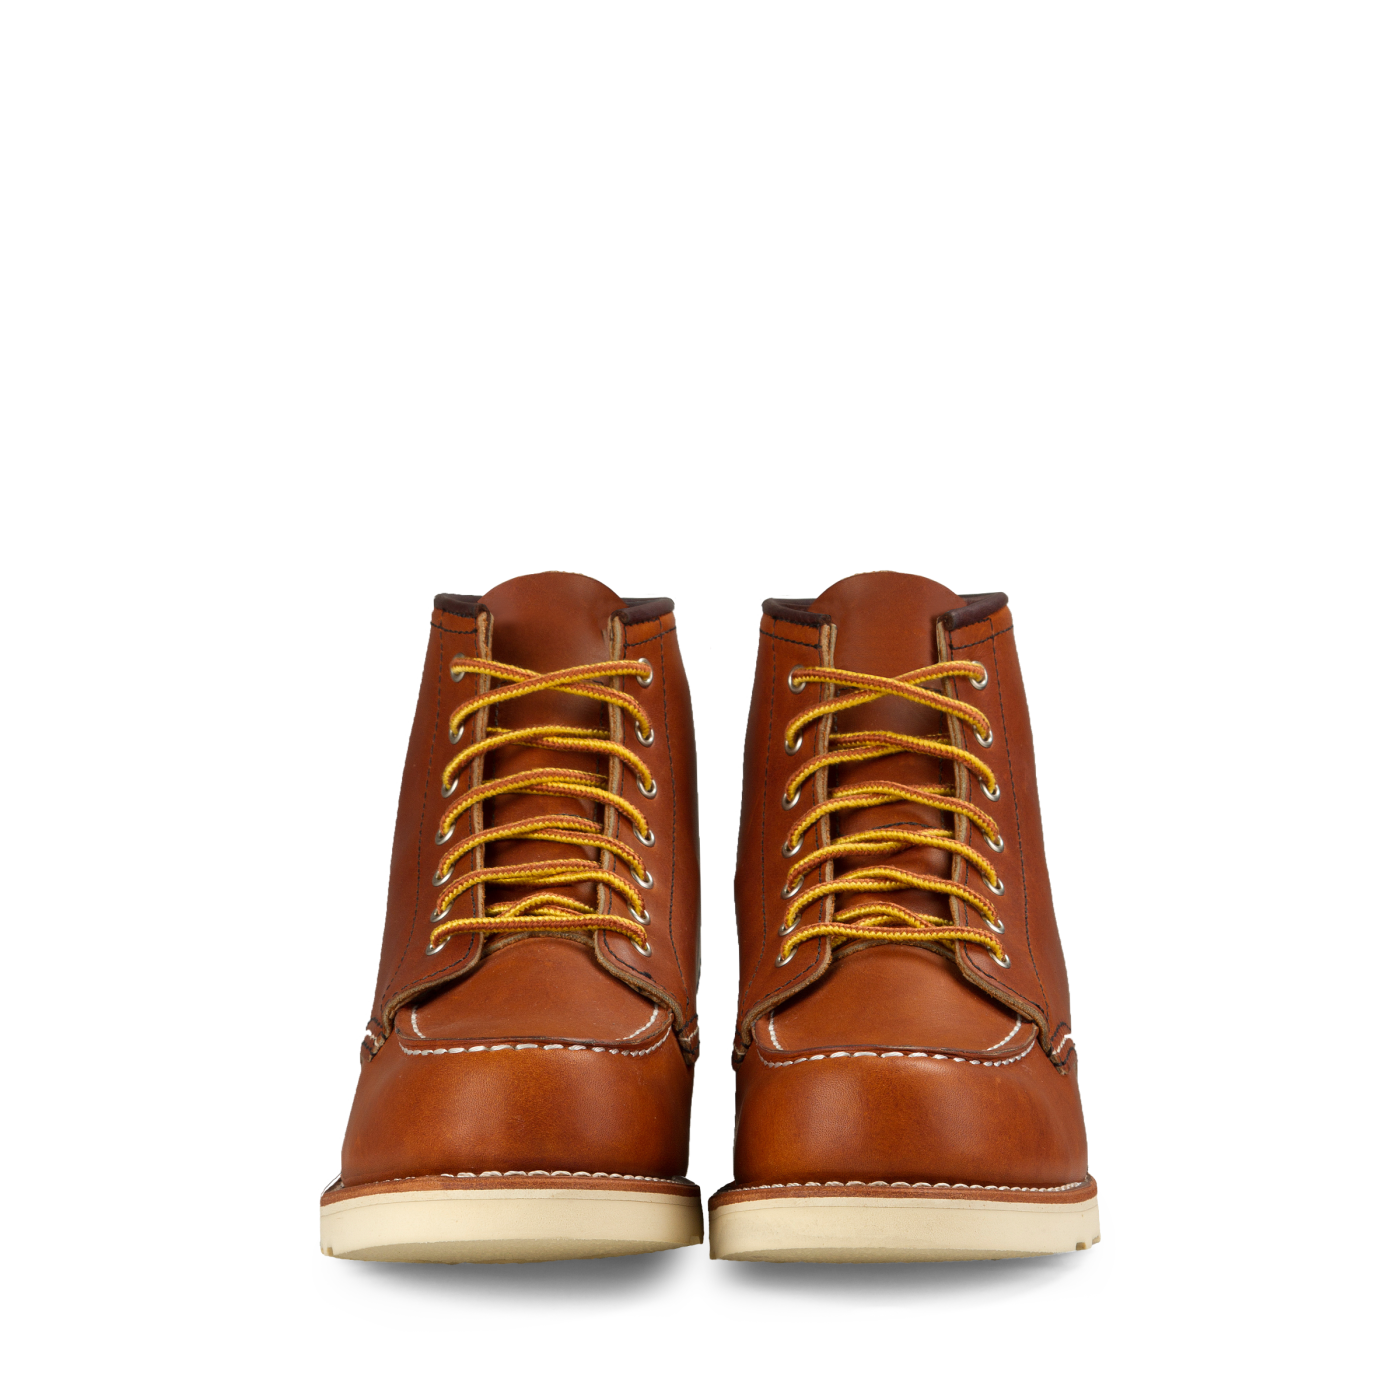 Red Wing 3375 6" Moc Toe Boot